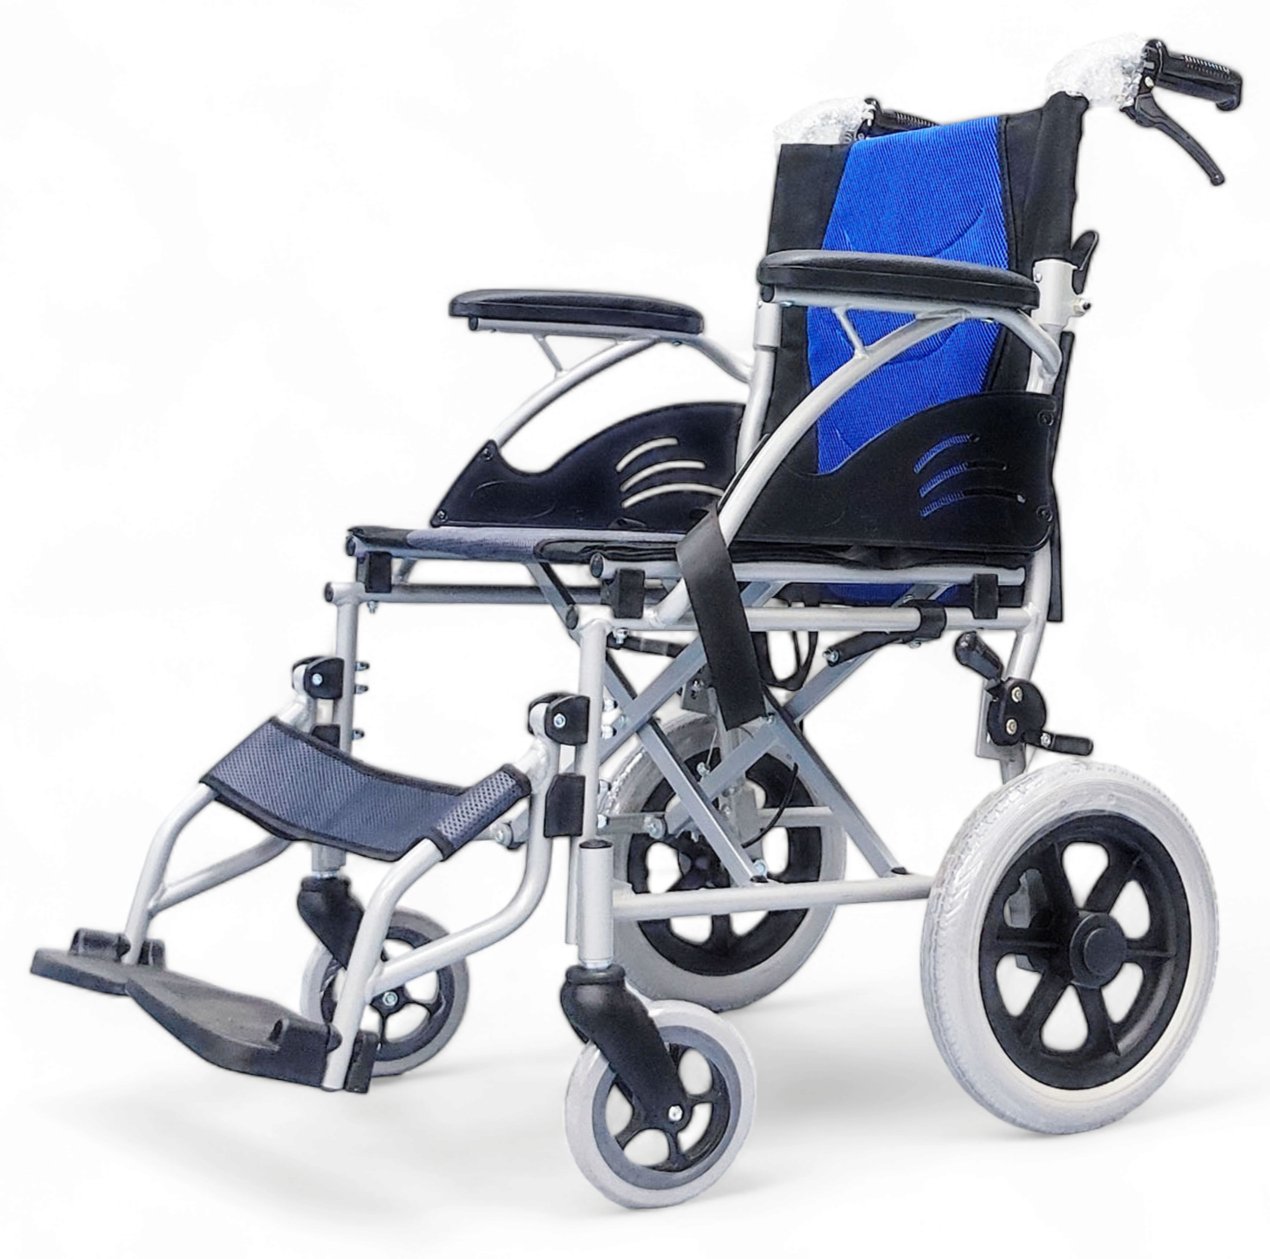 For users who require mobility assistance unable to propelled - Push-Chair